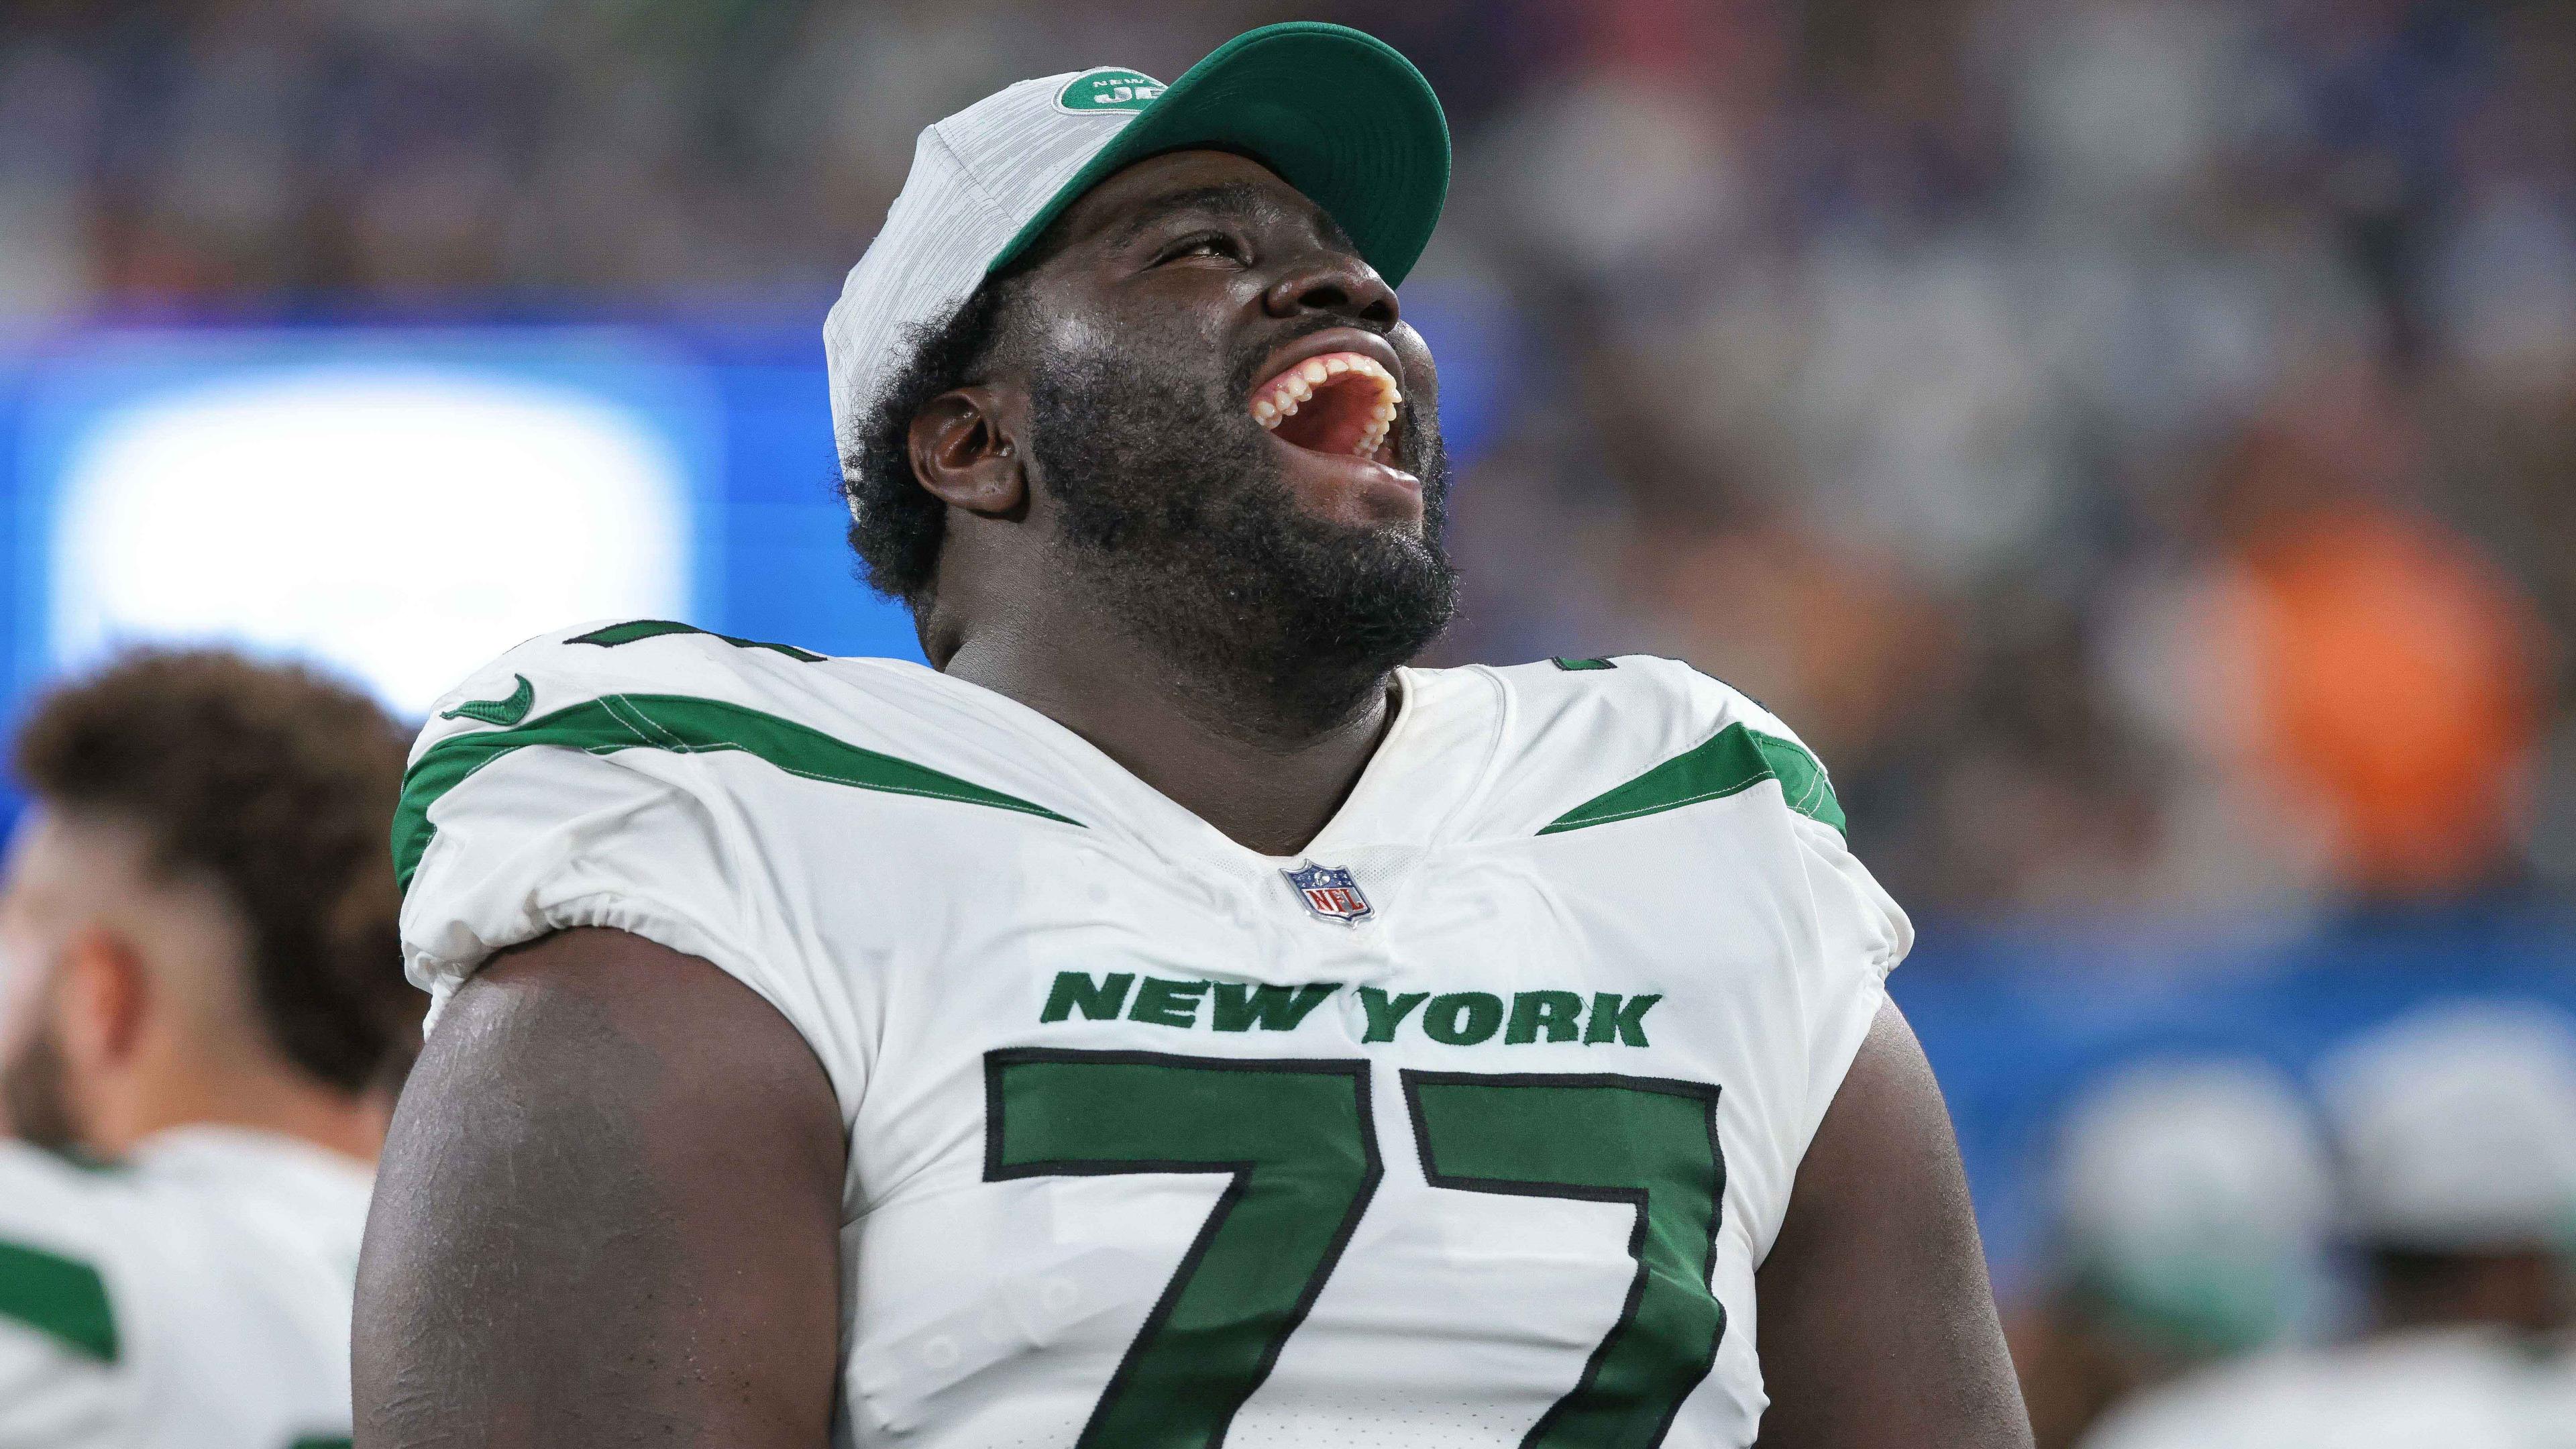 Aug 14, 2021; East Rutherford, New Jersey, USA; New York Jets offensive tackle Mekhi Becton (77) laughs during the second half against the New York Giants at MetLife Stadium. / © Vincent Carchietta-USA TODAY Sports